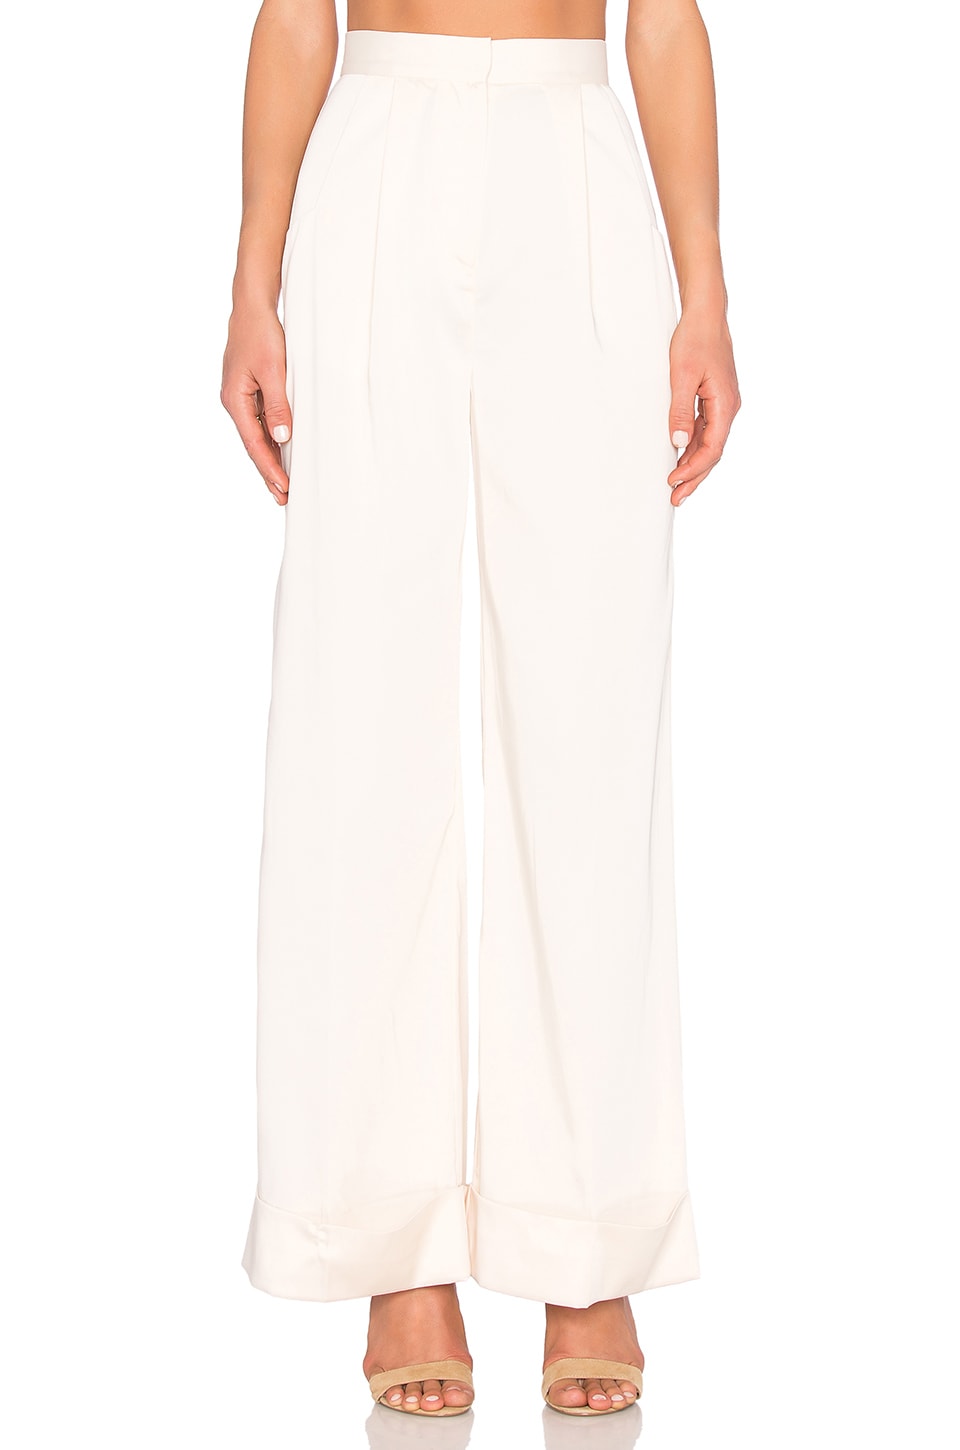 Finders Keepers Belfast Pant in Cream | REVOLVE